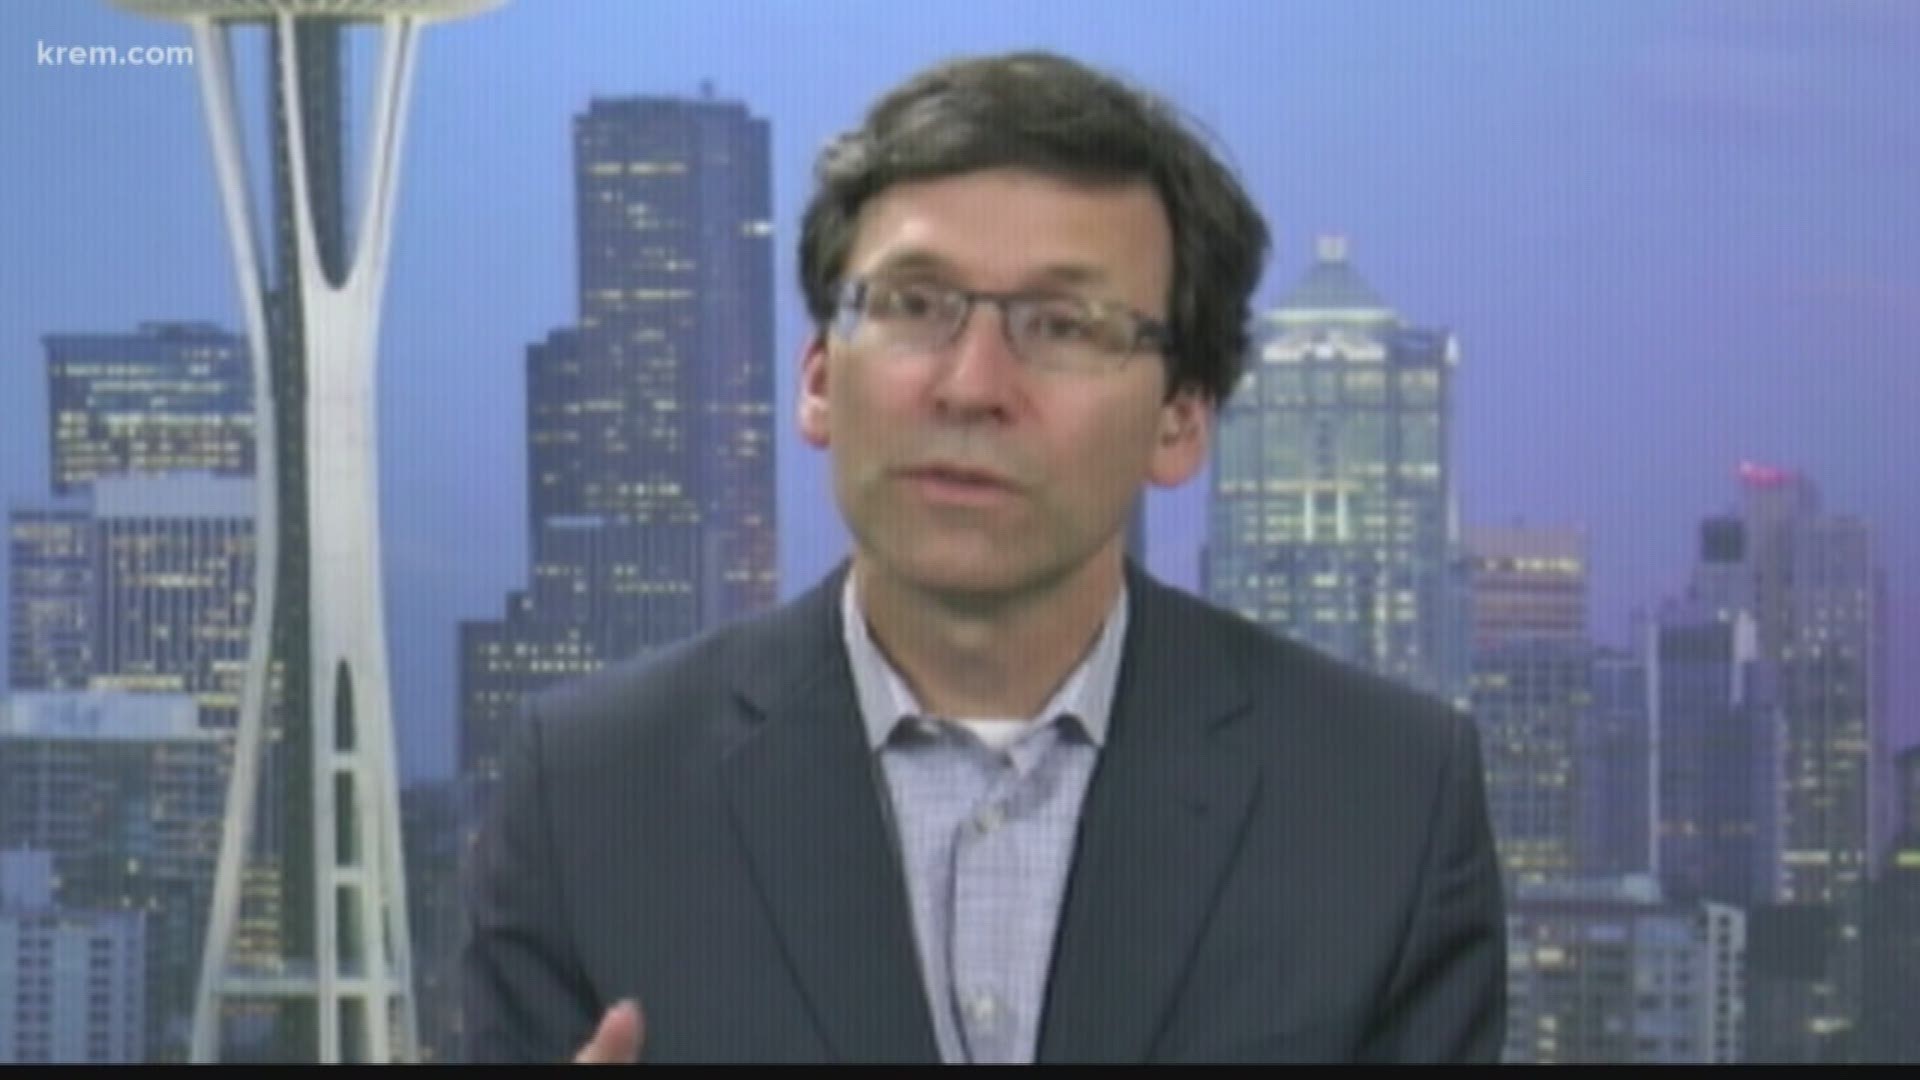 KREM Reporter Casey Decker spoke with Washington Attorney General Bob Ferguson, who is suing a pharmaceutical company and three distributors over the opioid crisis.